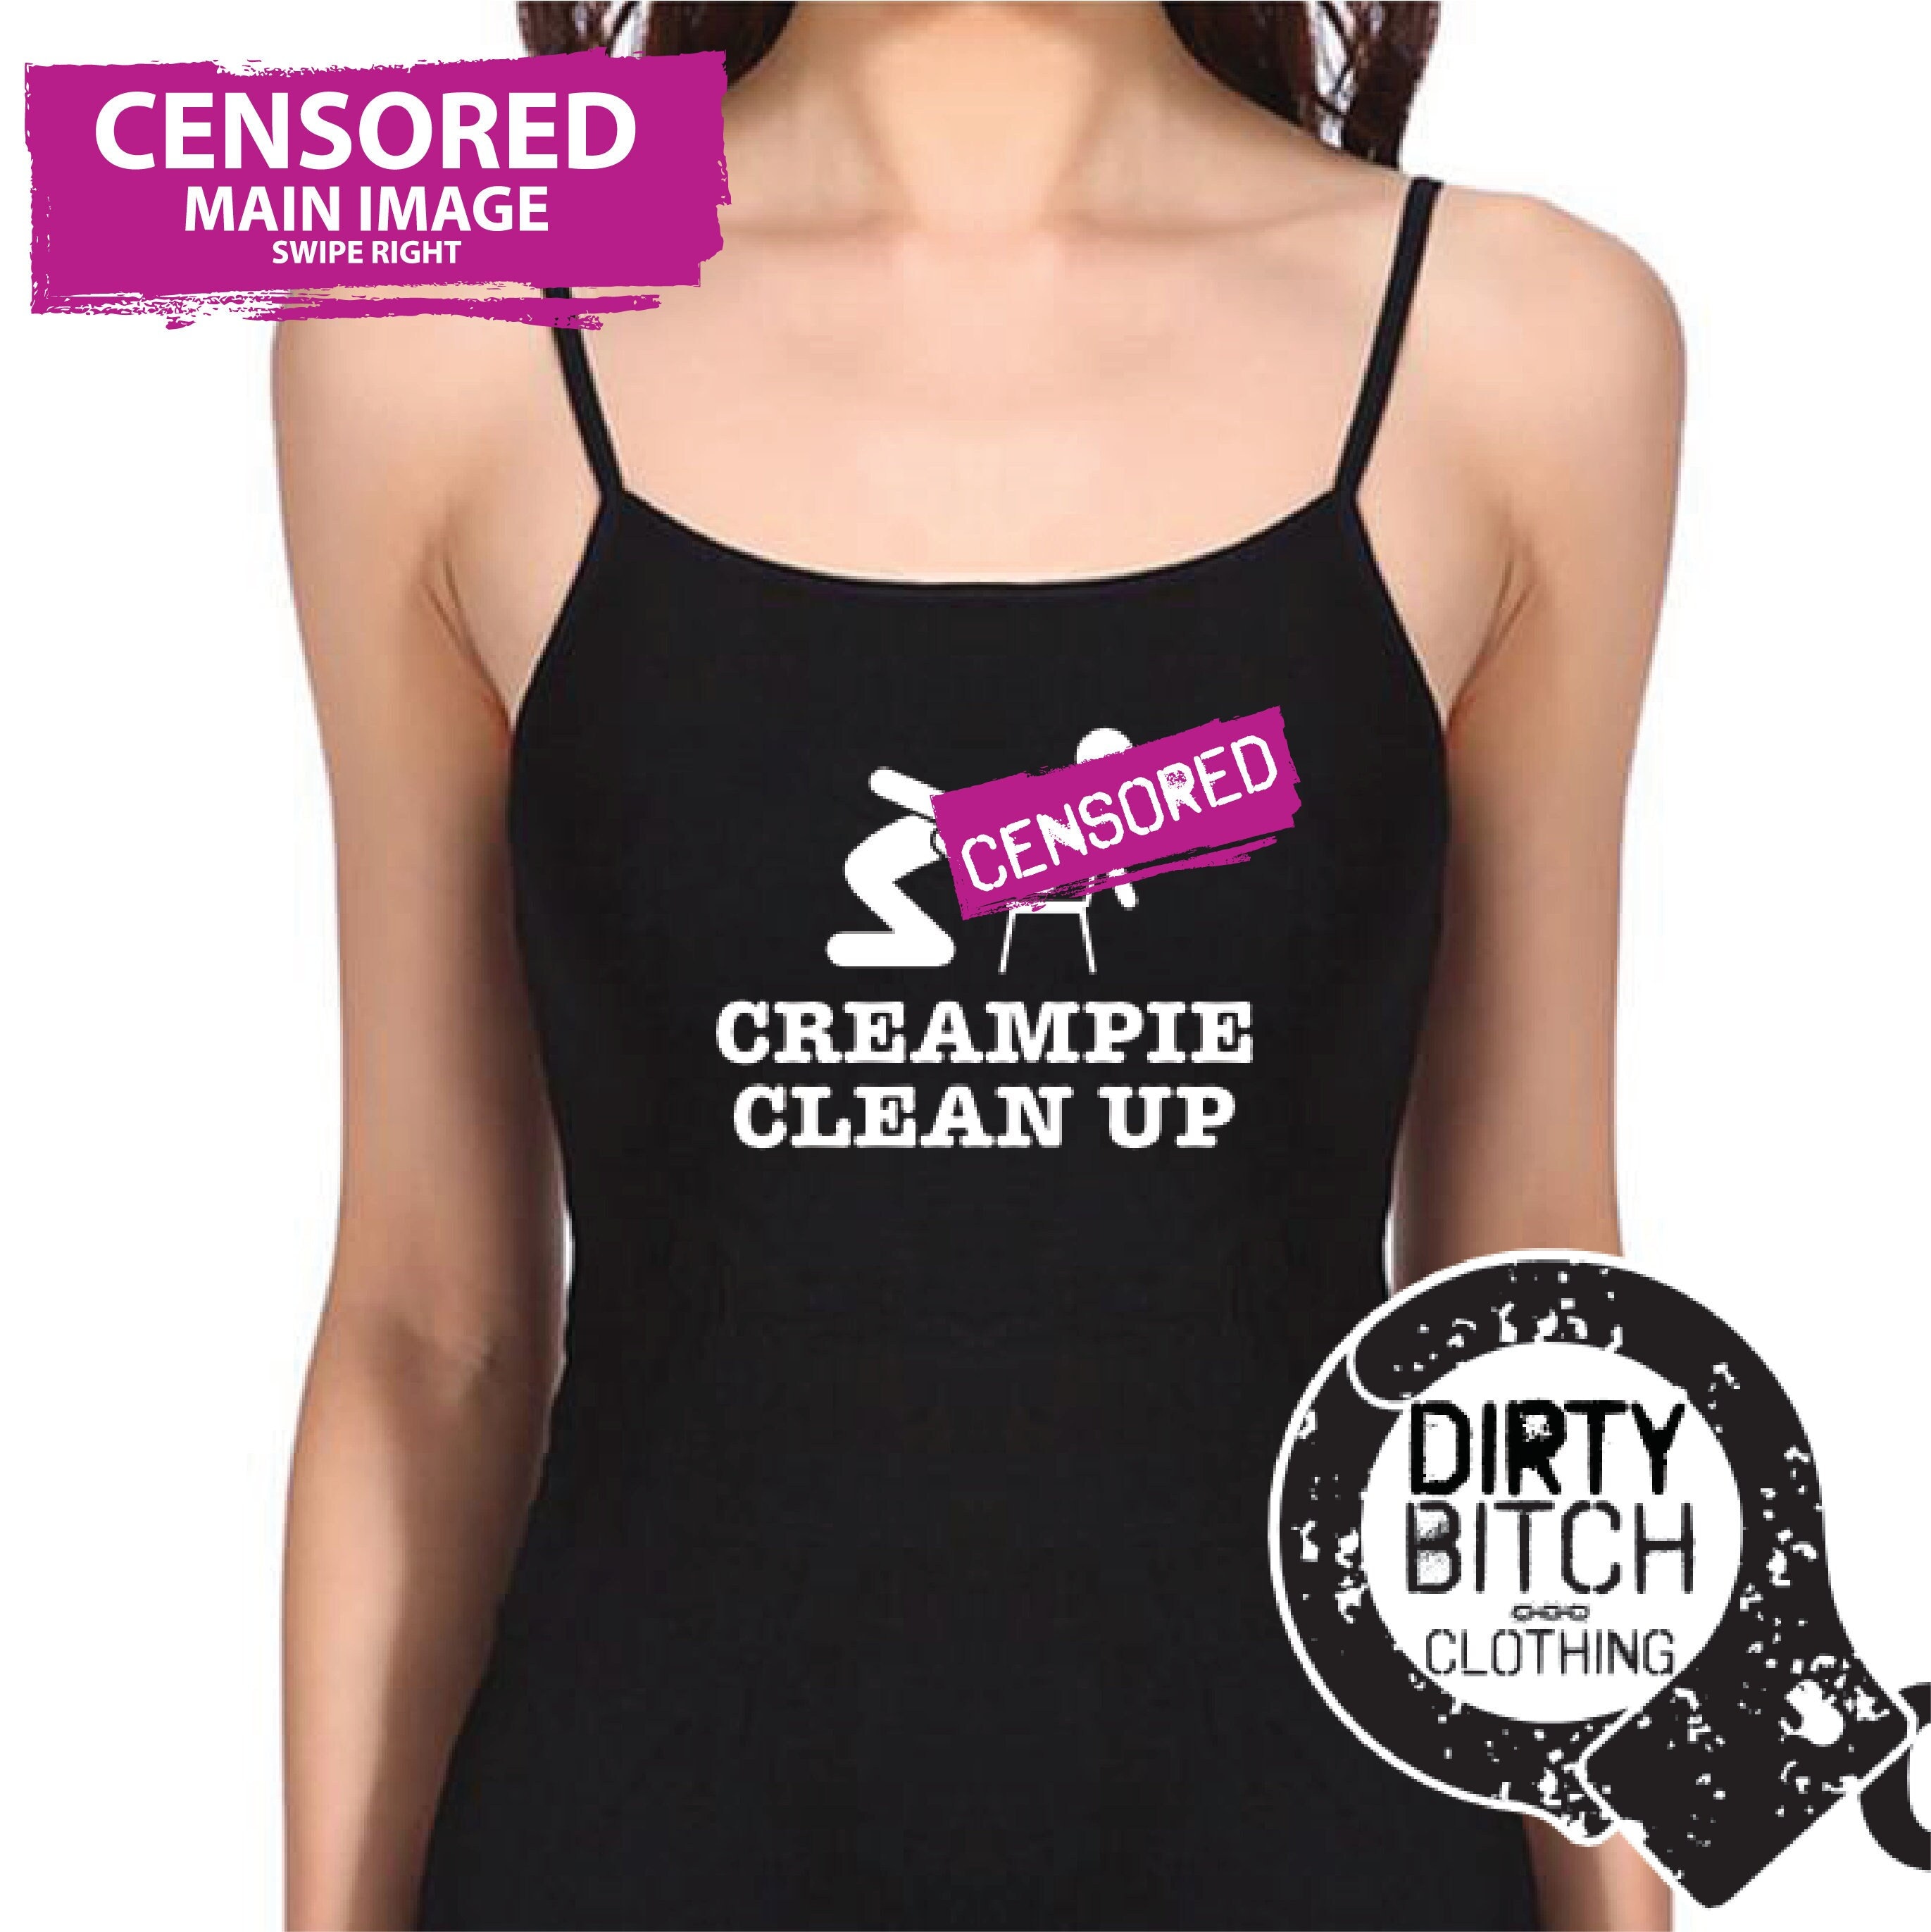 Creampie Clean up Adult T-shirt Clothing Boobs Hotwife photo